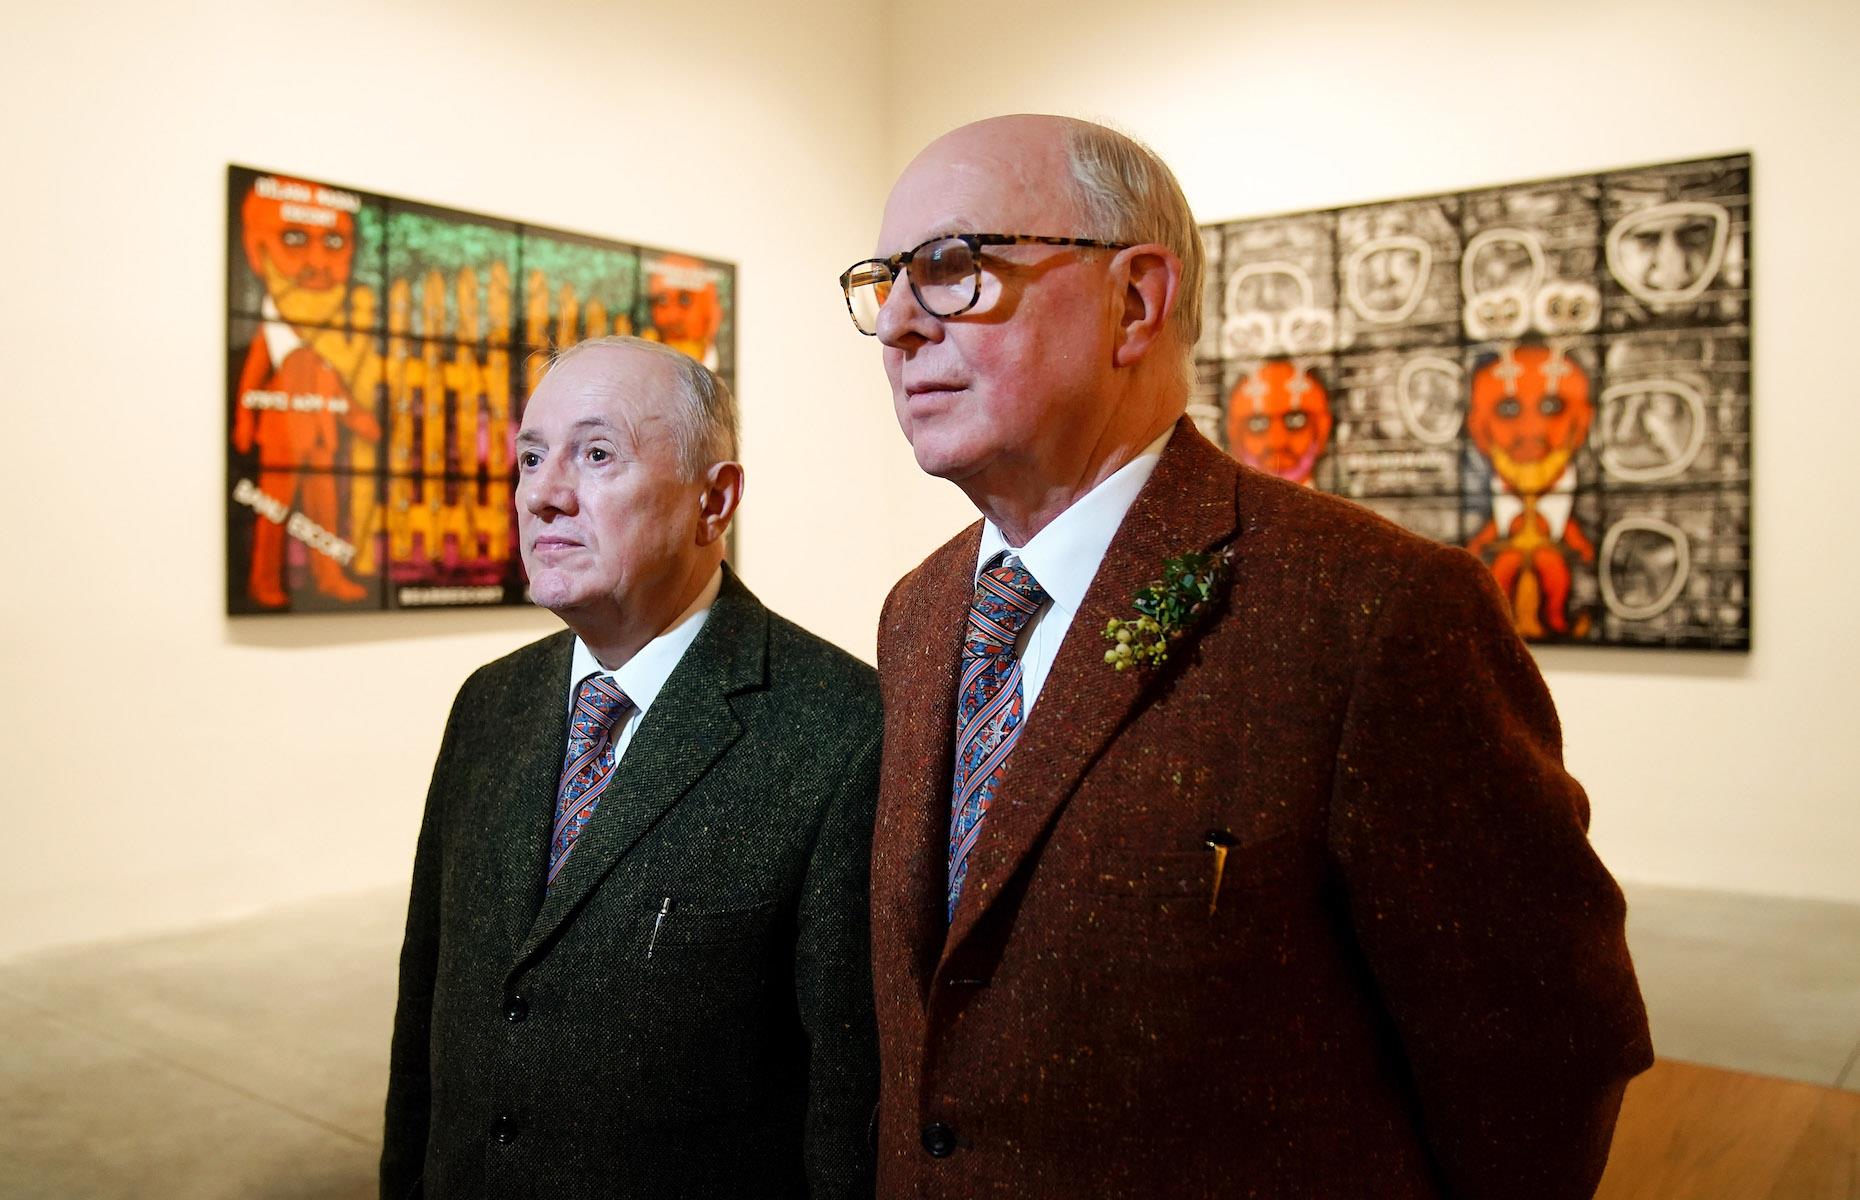 To Her Majesty, Gilbert & George: $2.5 million (£1.9m)